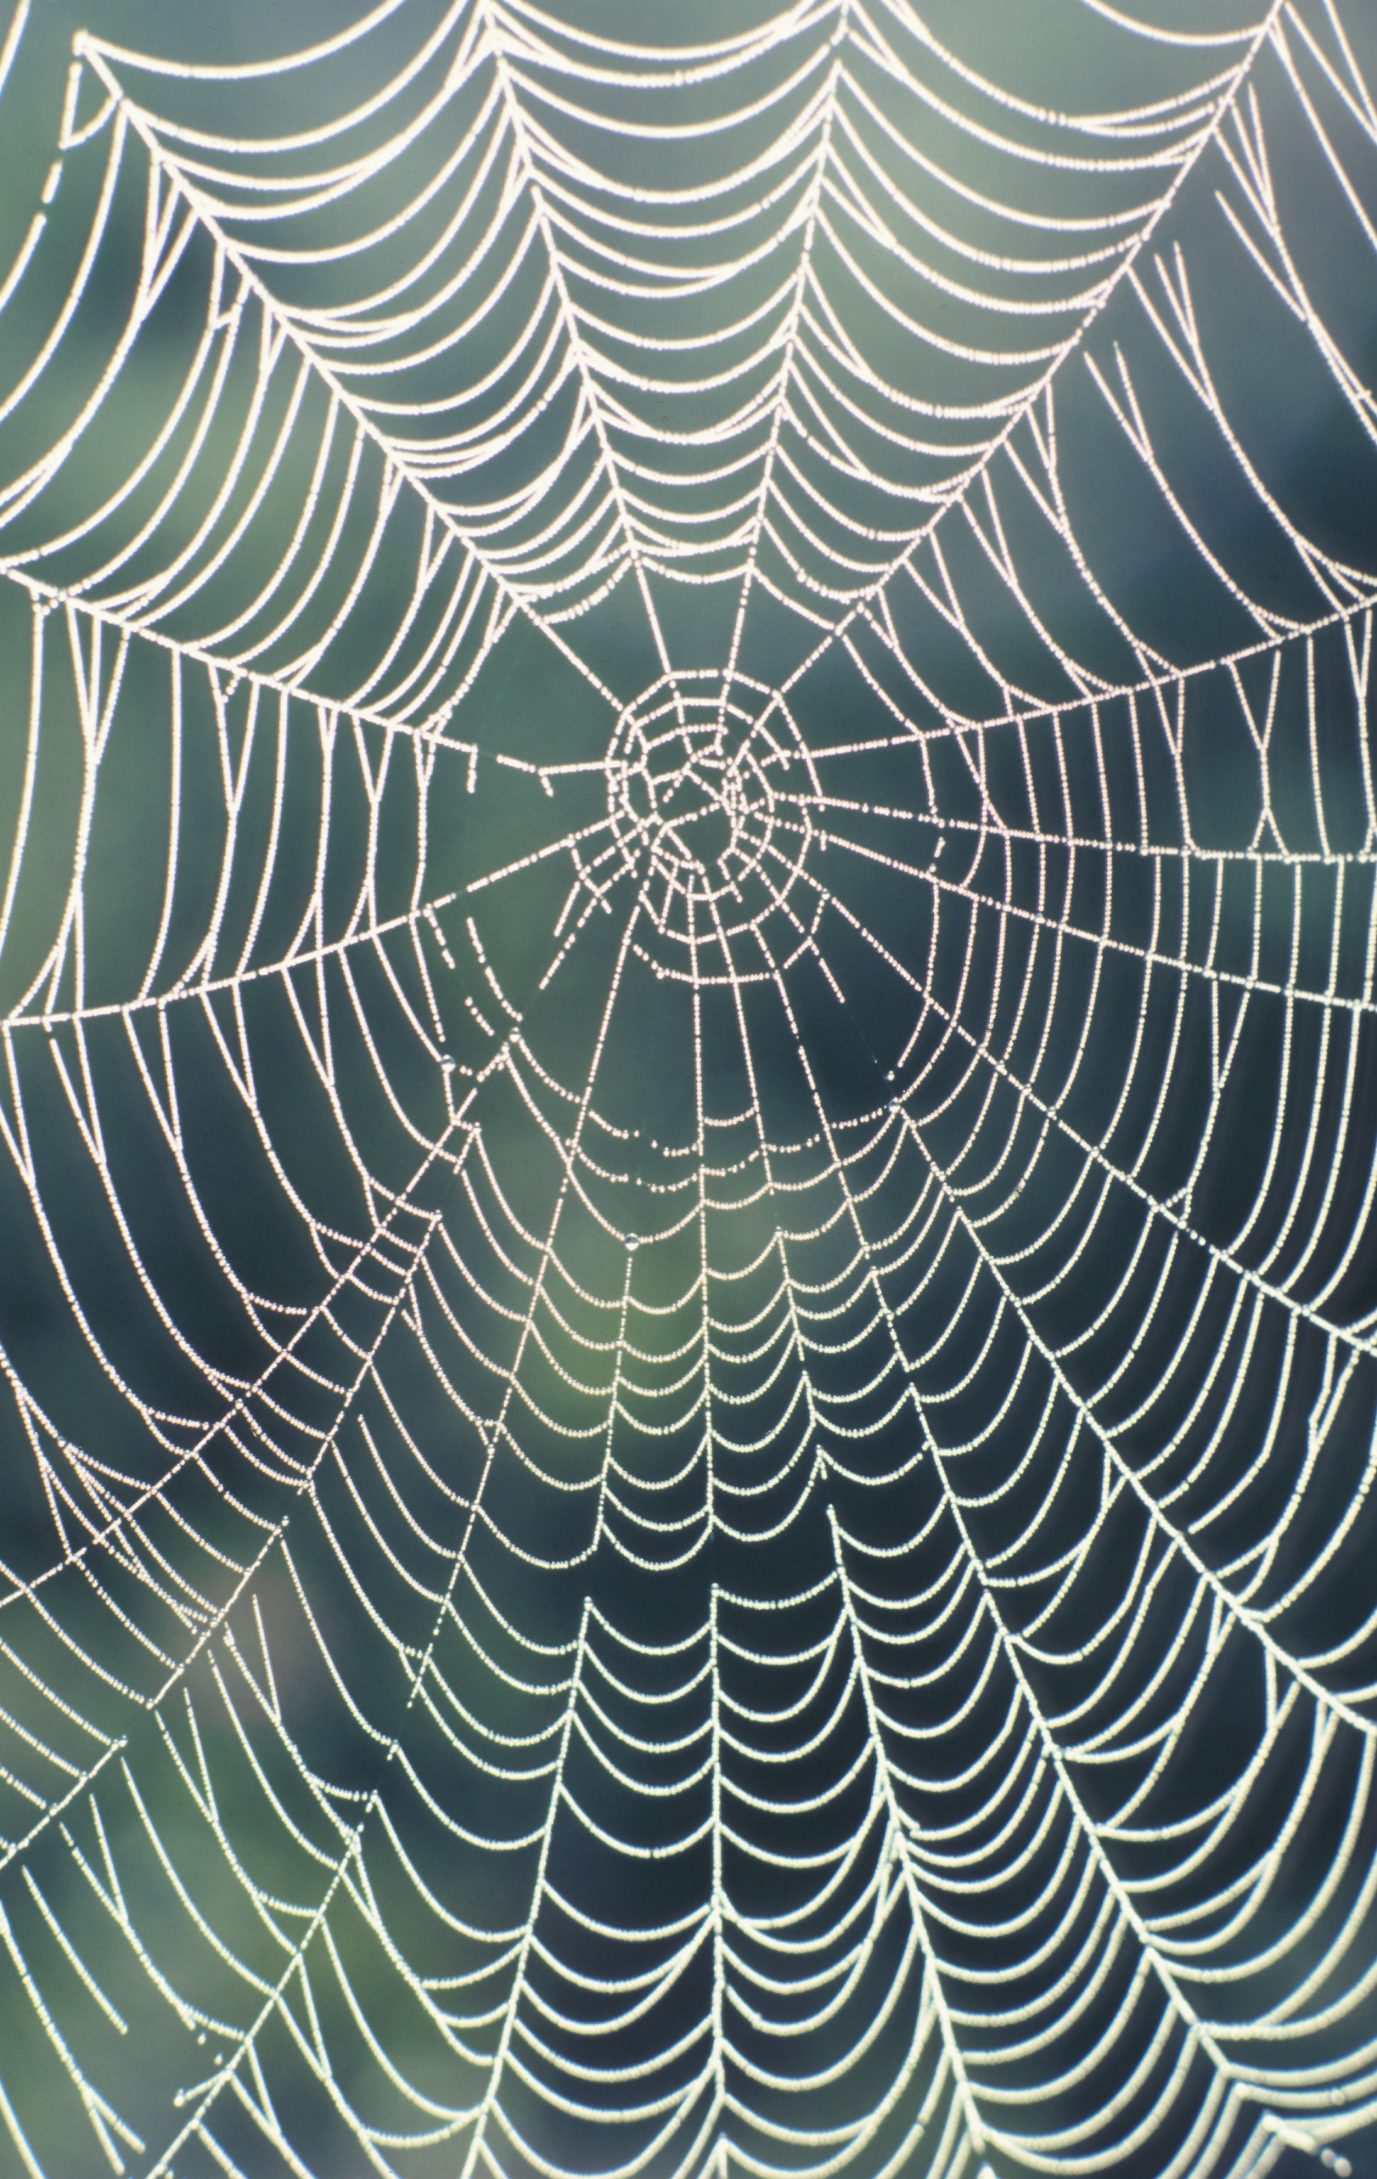 How to Make a Realistic Spider Web | eHow